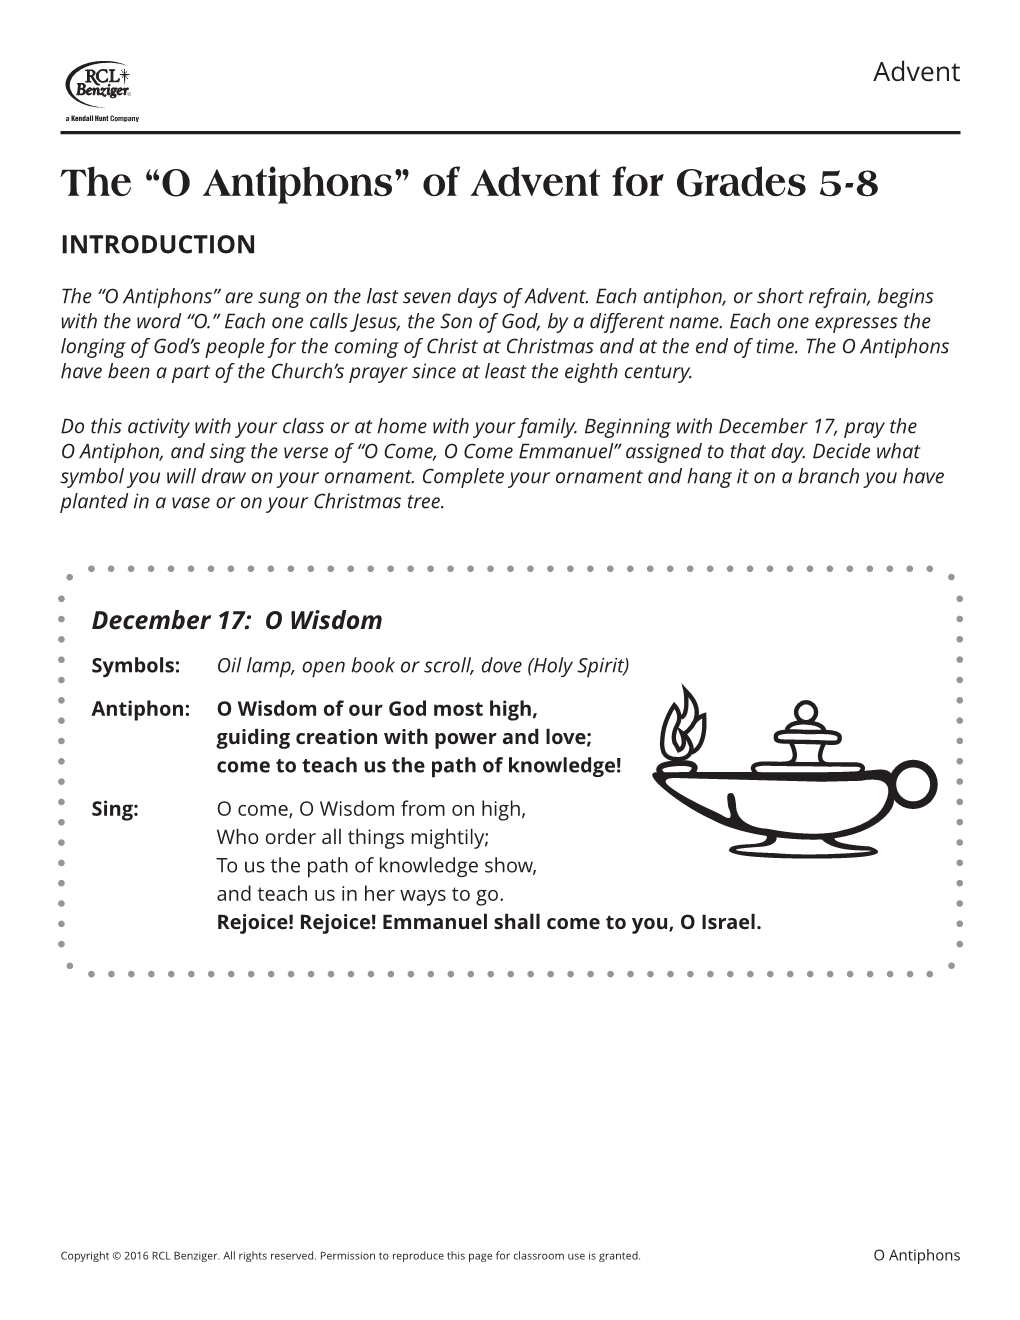 The “O Antiphons” of Advent for Grades 5-8